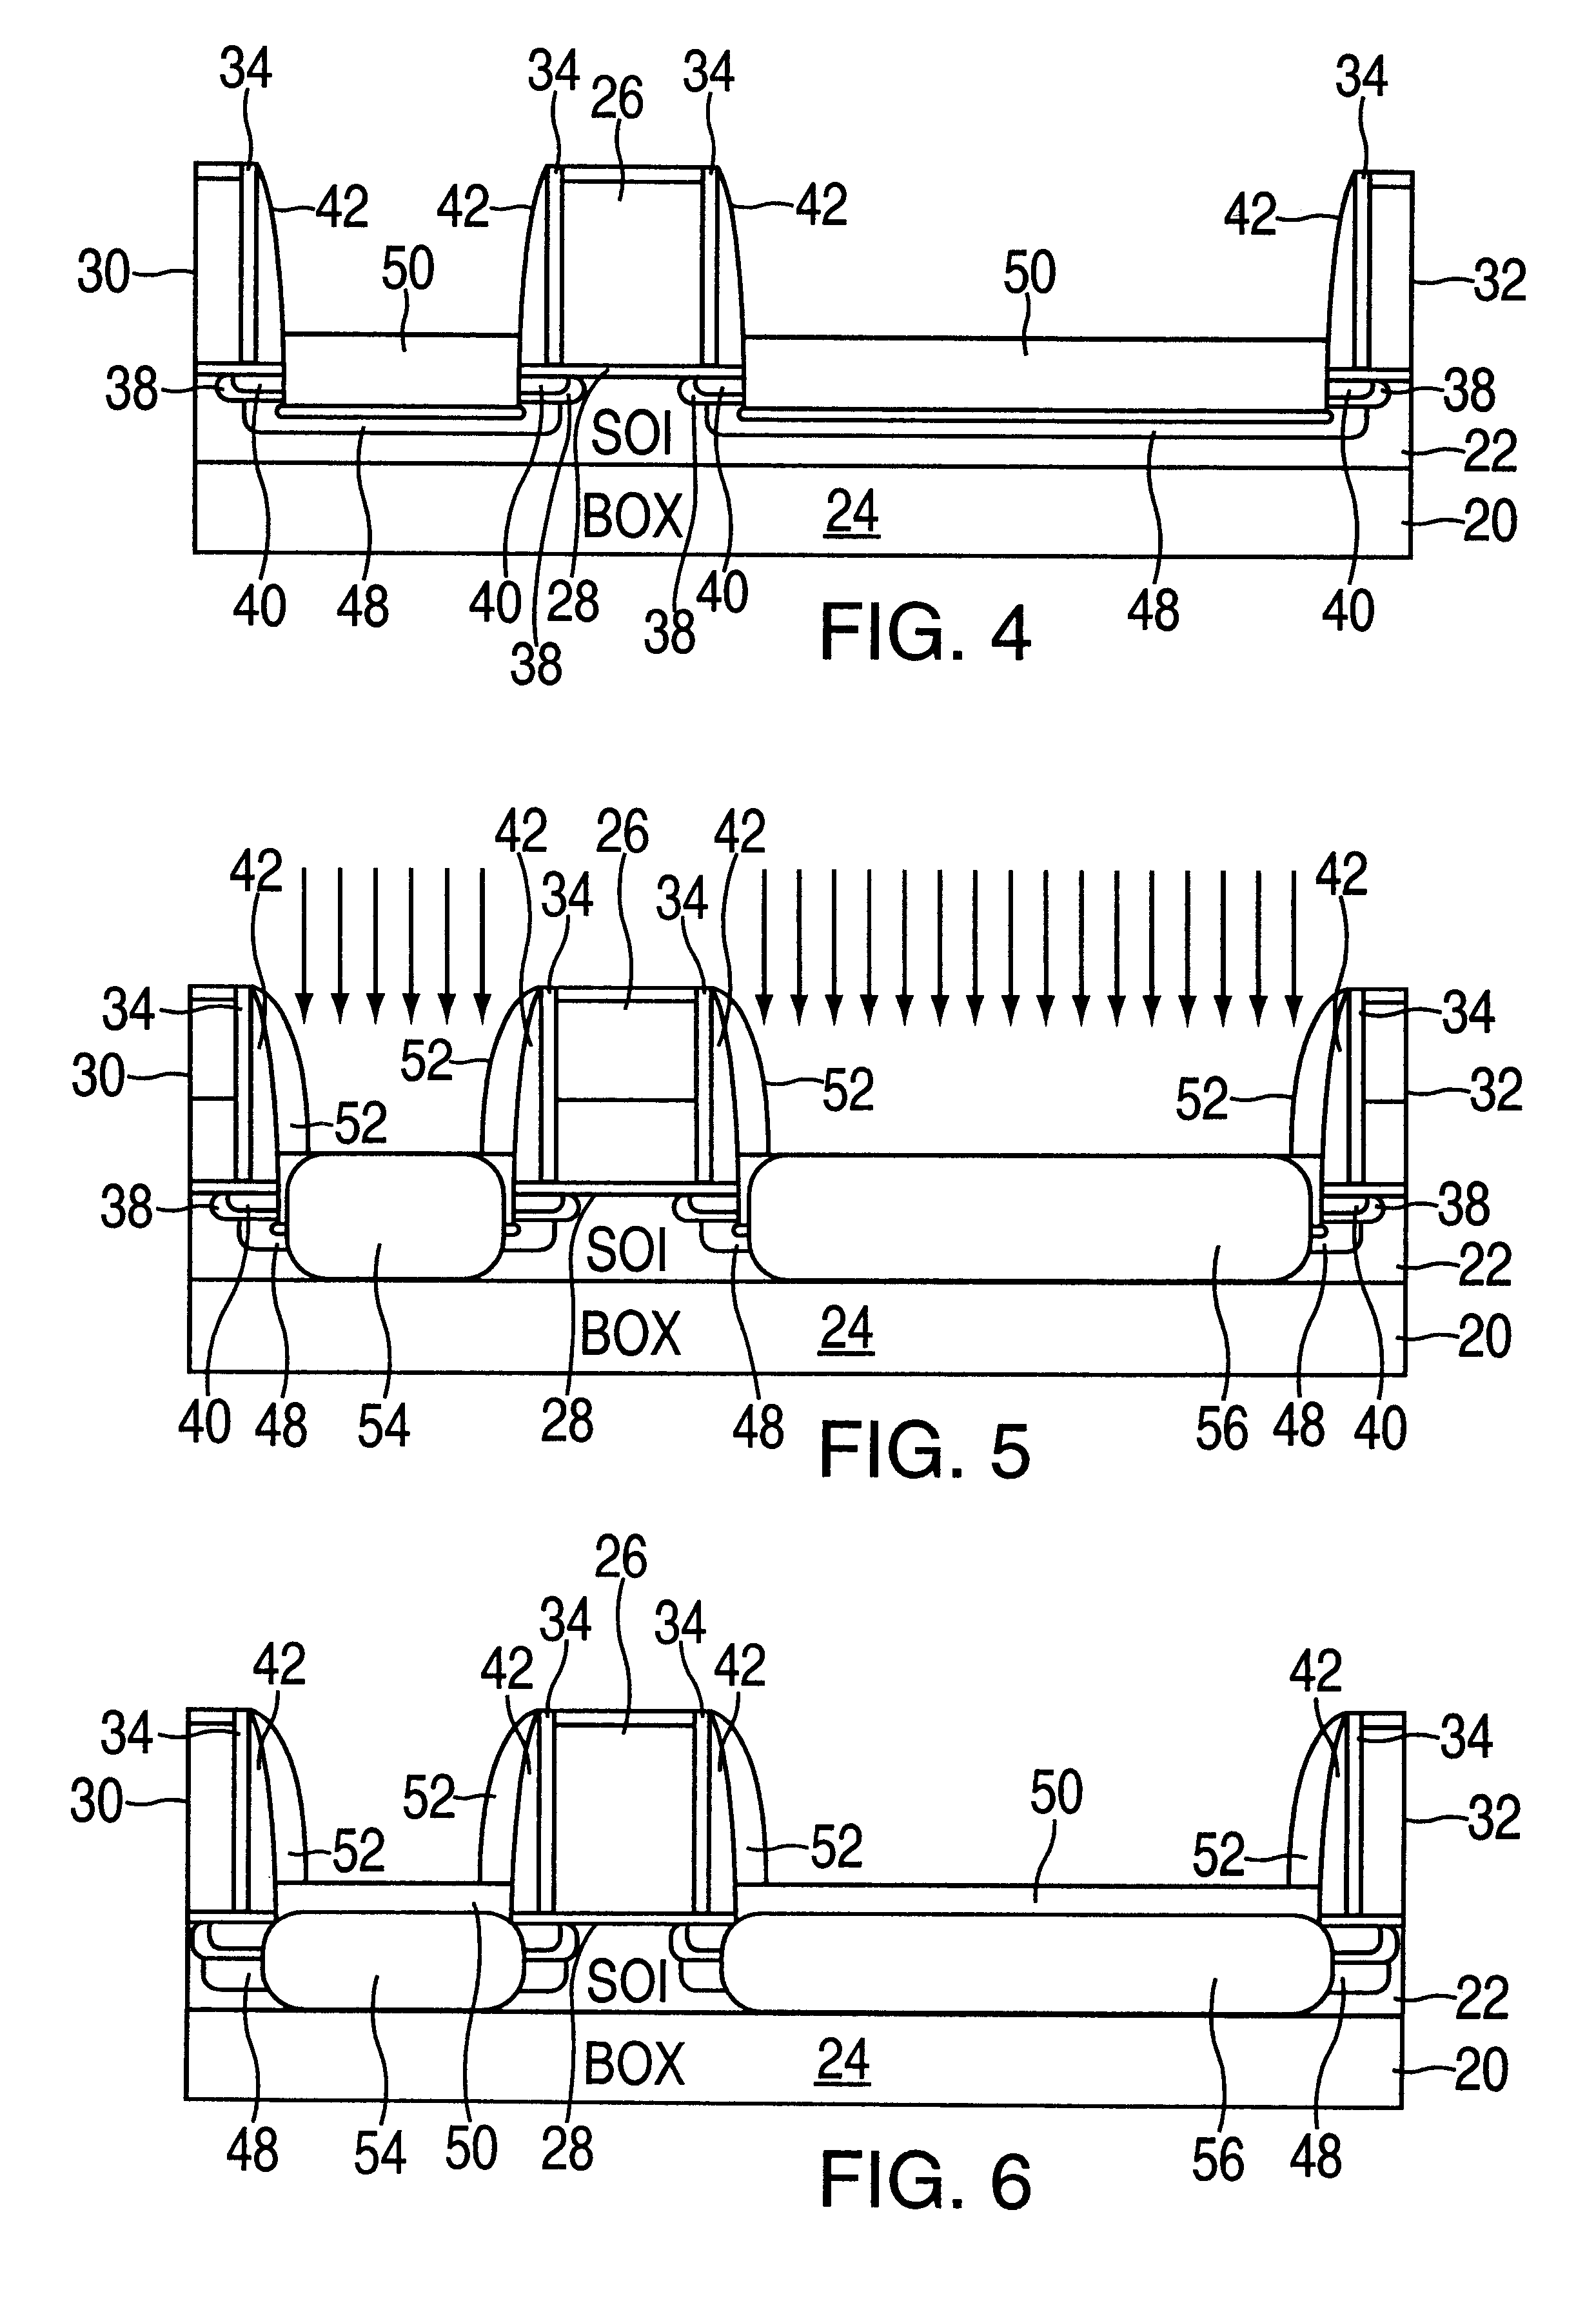 Process for fabricating an MOS device having highly-localized halo regions